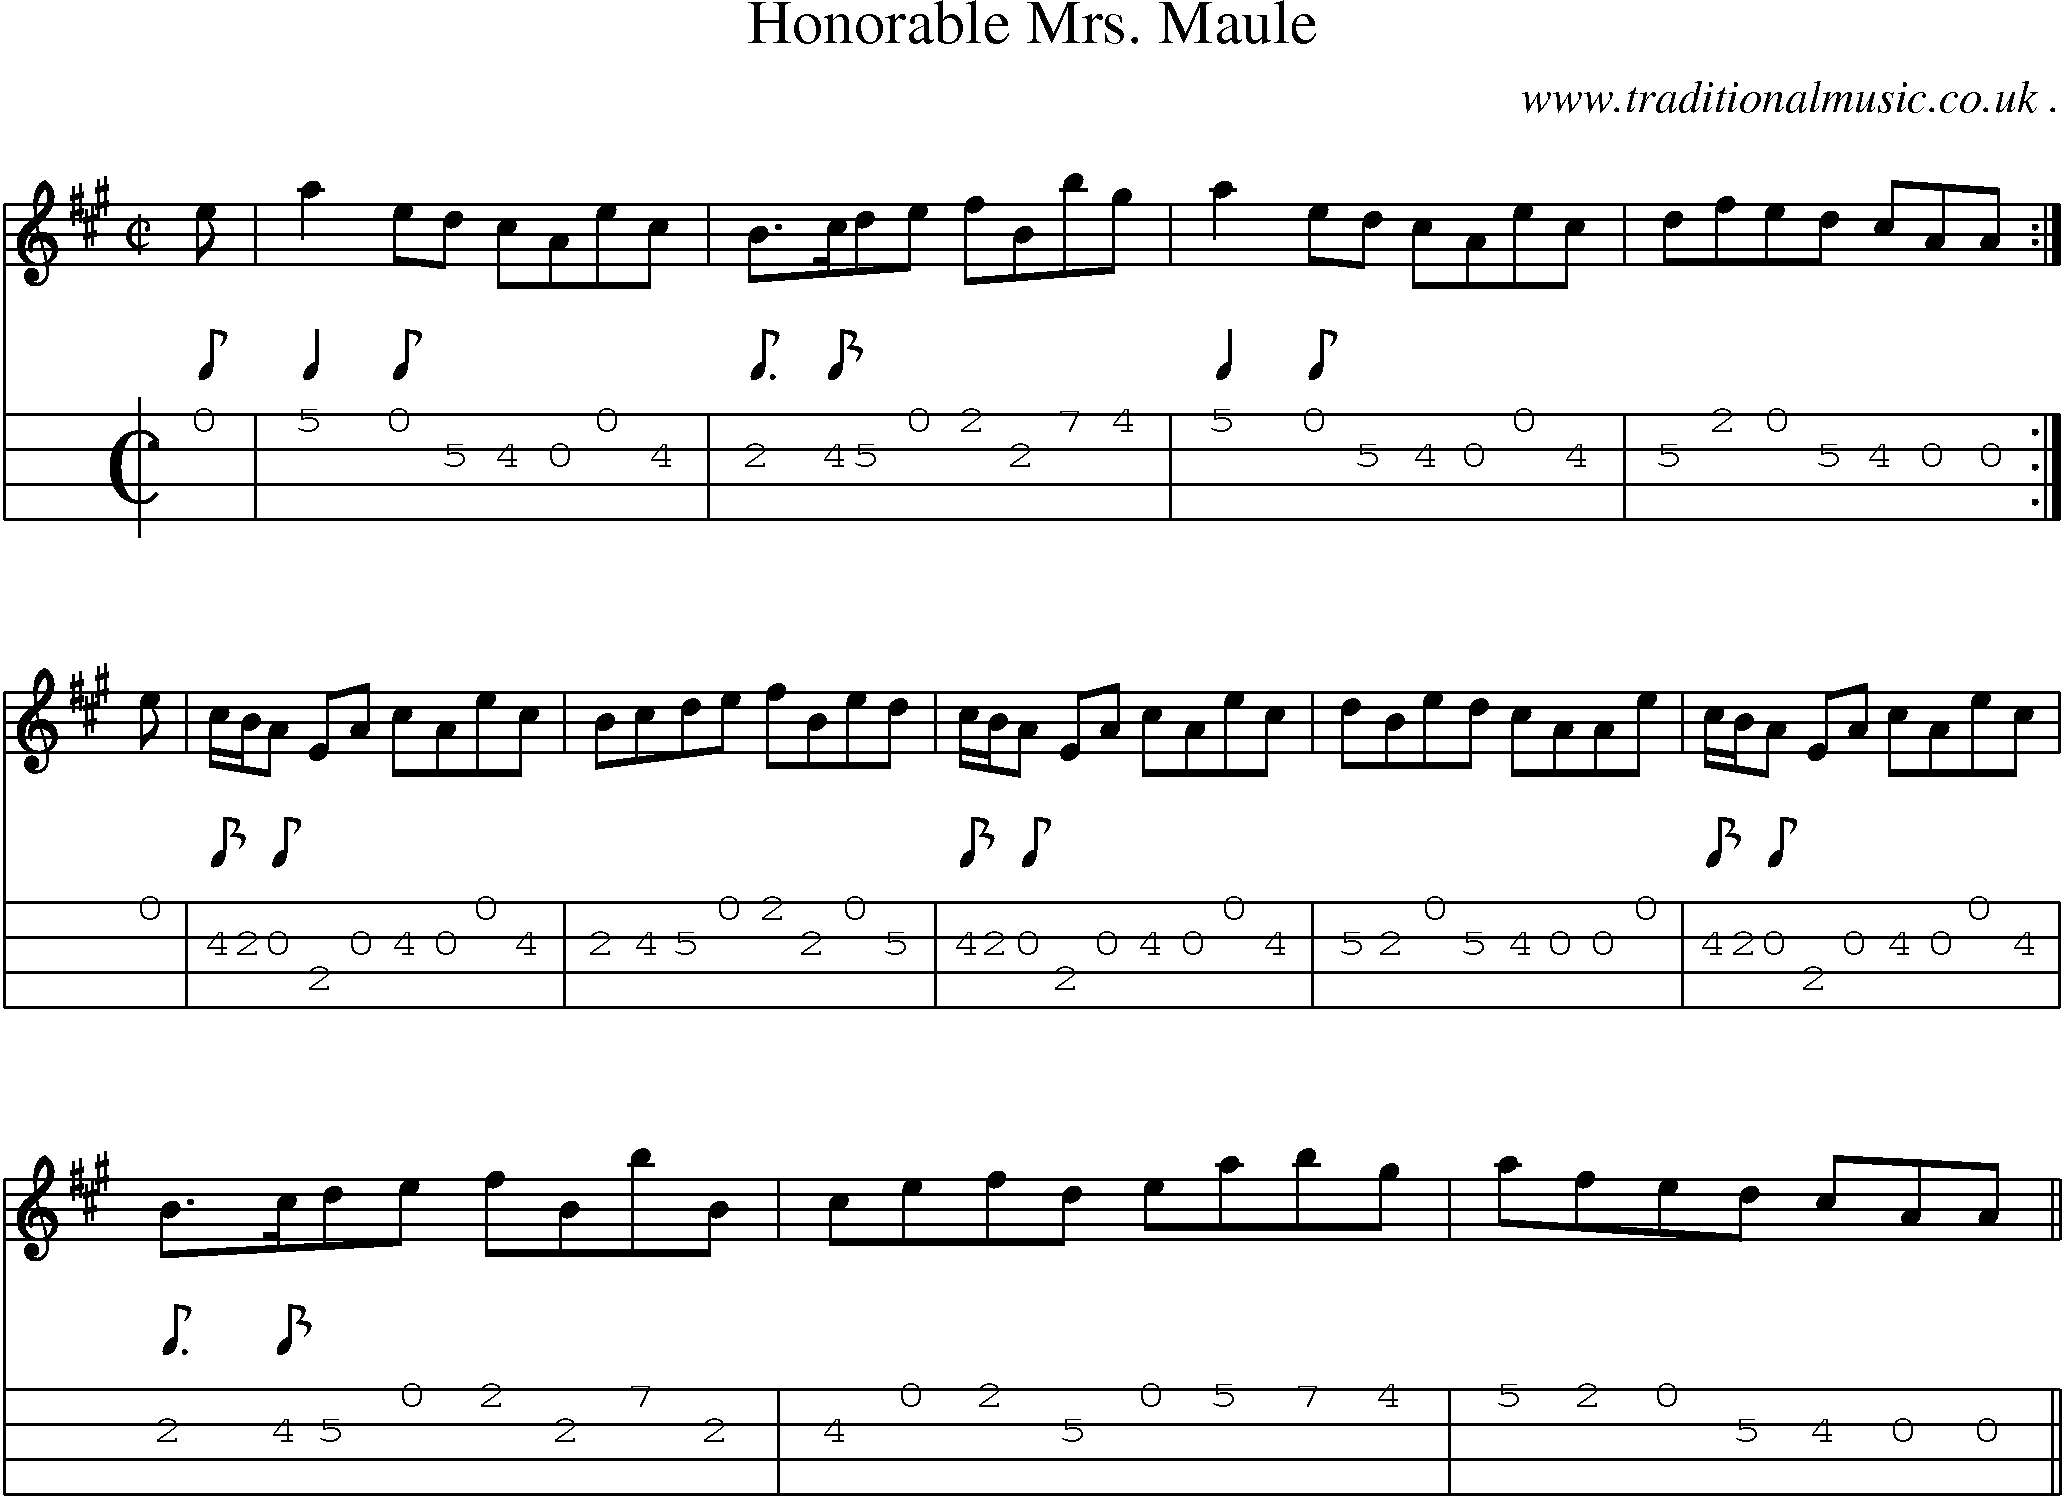 Sheet-music  score, Chords and Mandolin Tabs for Honorable Mrs Maule